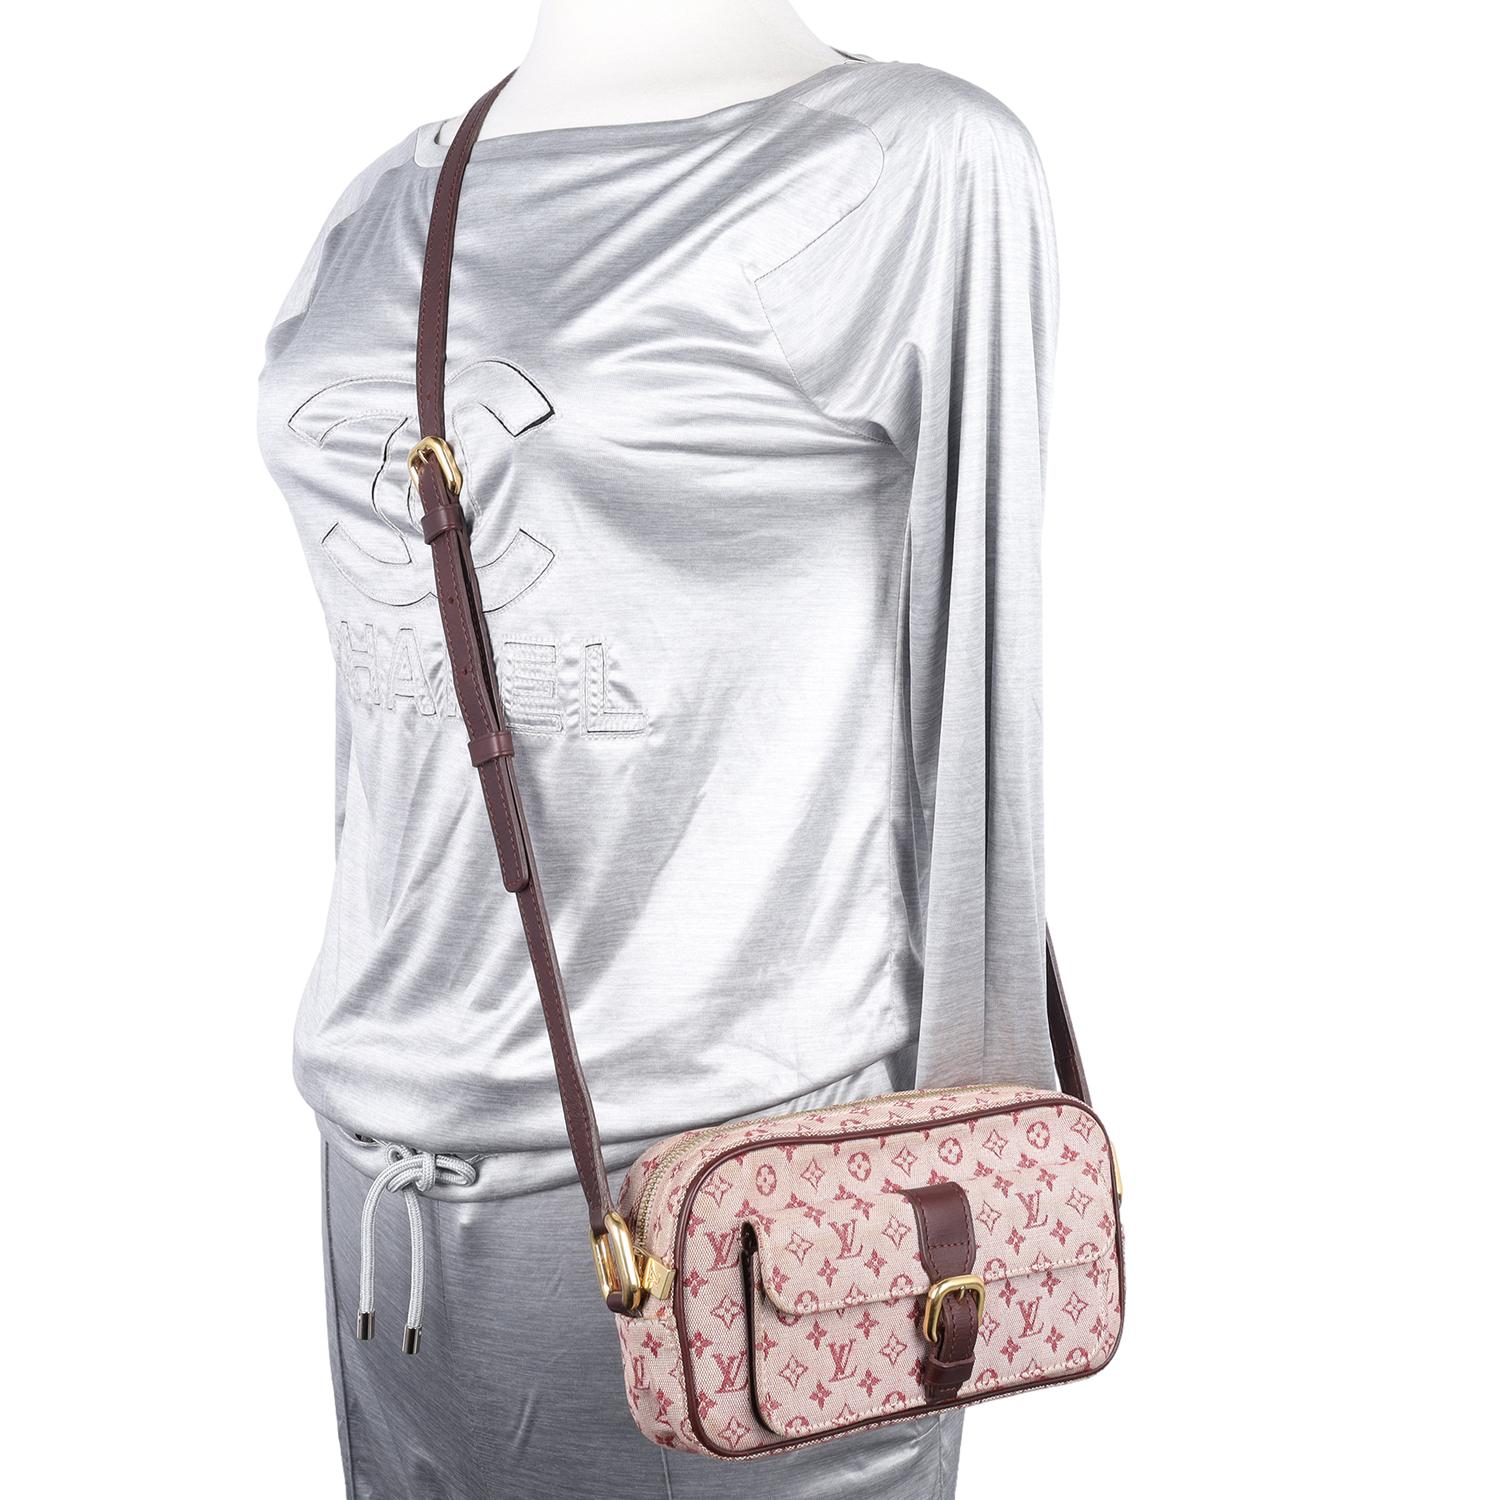 Authentic, pre-loved Louis Vuitton Mini Lin Juliette Satchel Crossbody Bag in pink. The perfect day bag to travel bag. Features mini lin monogram canvas, leather adjustable strap, zipper top closure, front slip pocket with buckle closure, beige